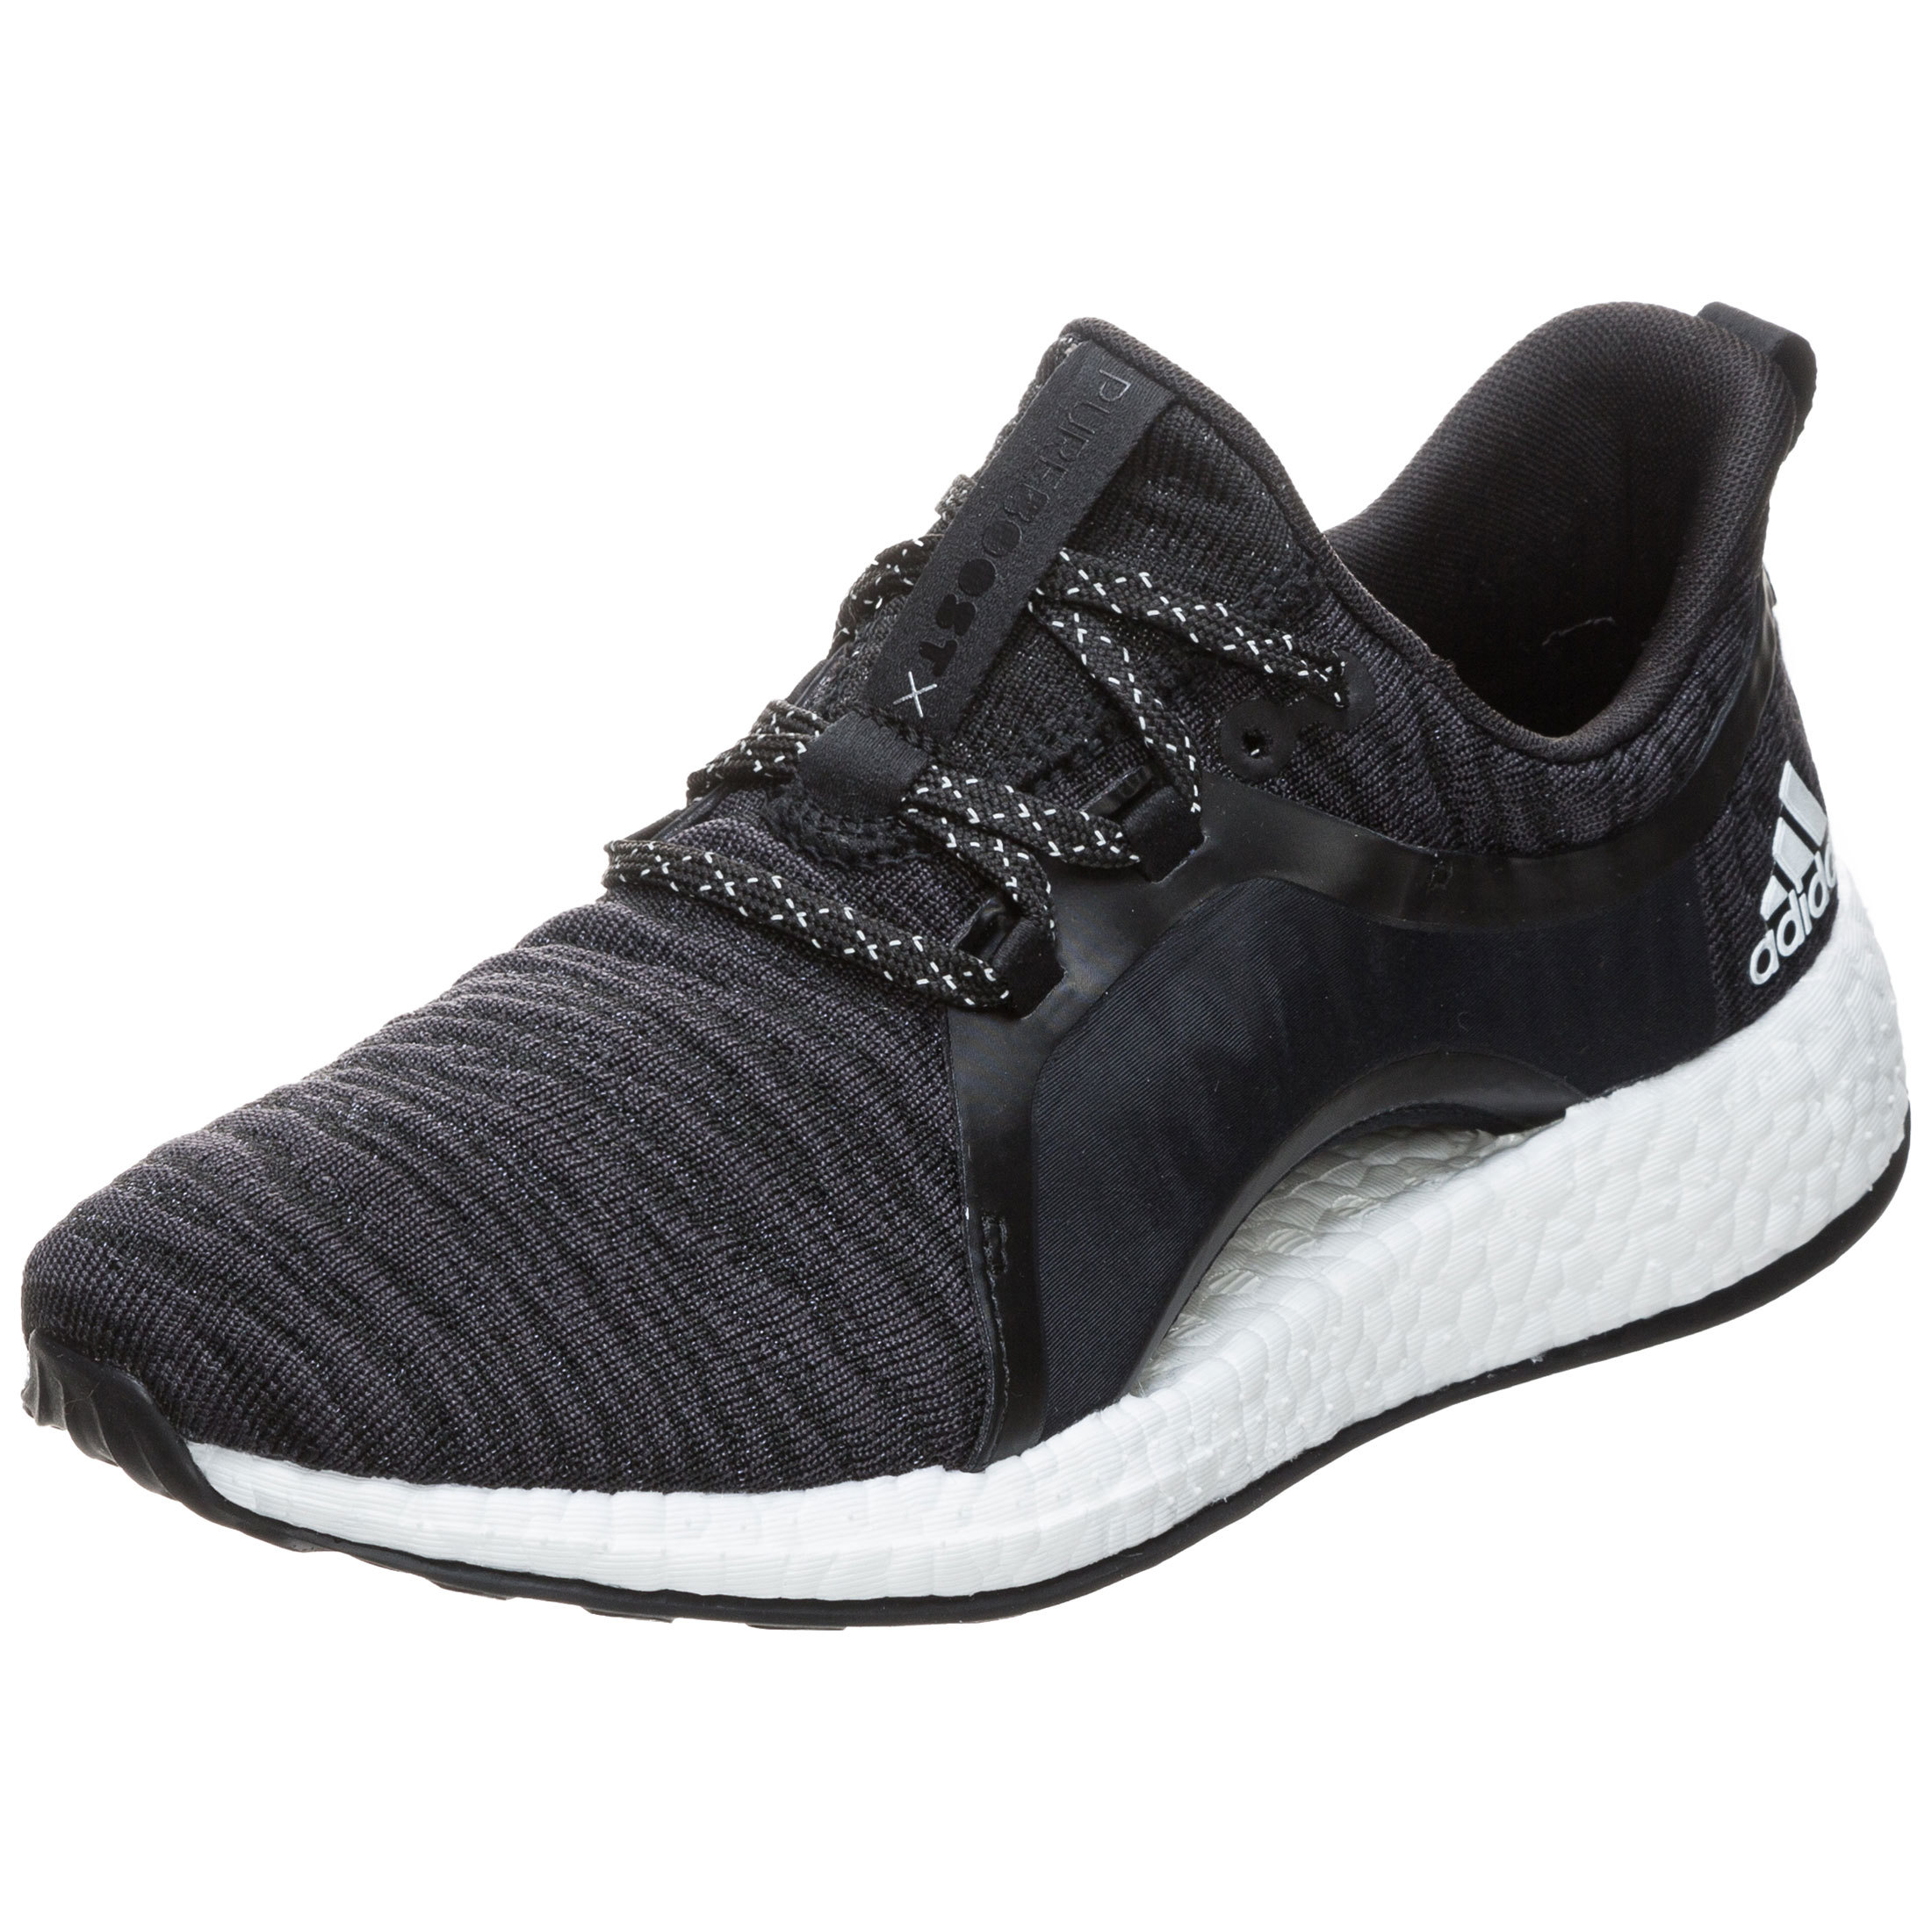 adidas Pureboost X Shoes | BY8928 